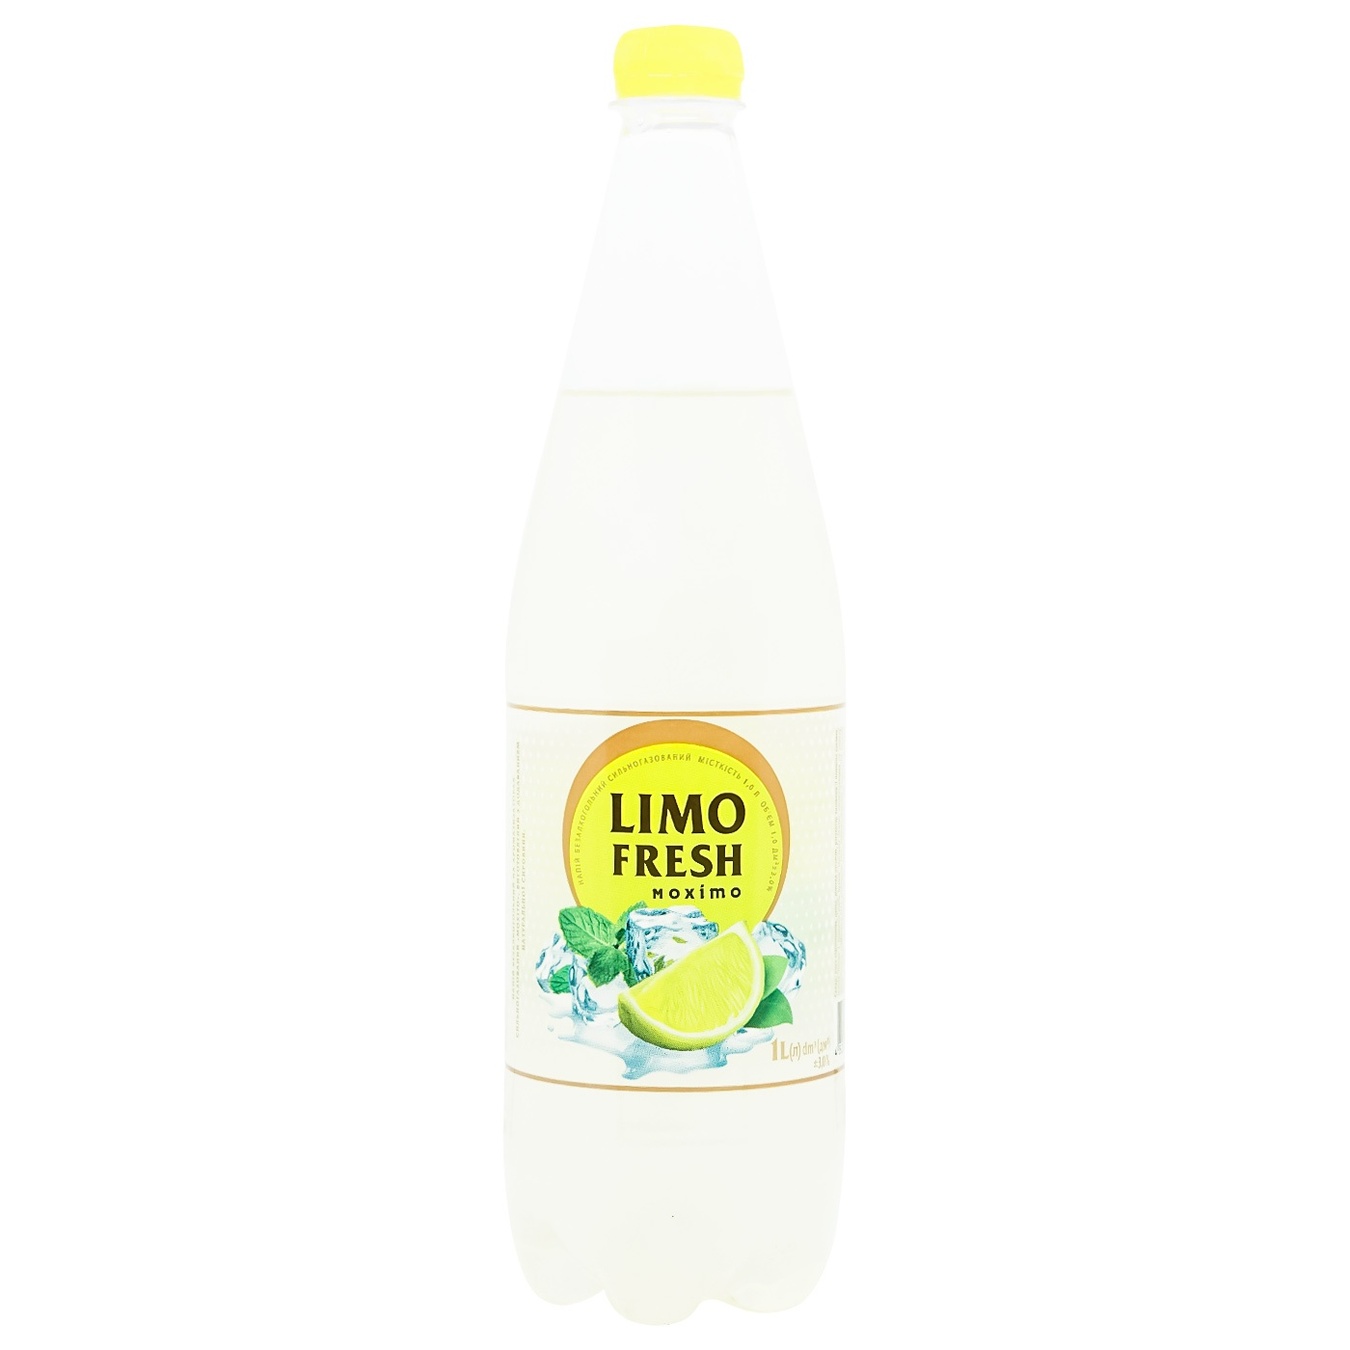 Carbonated drink Limofresh mojito 1 liter